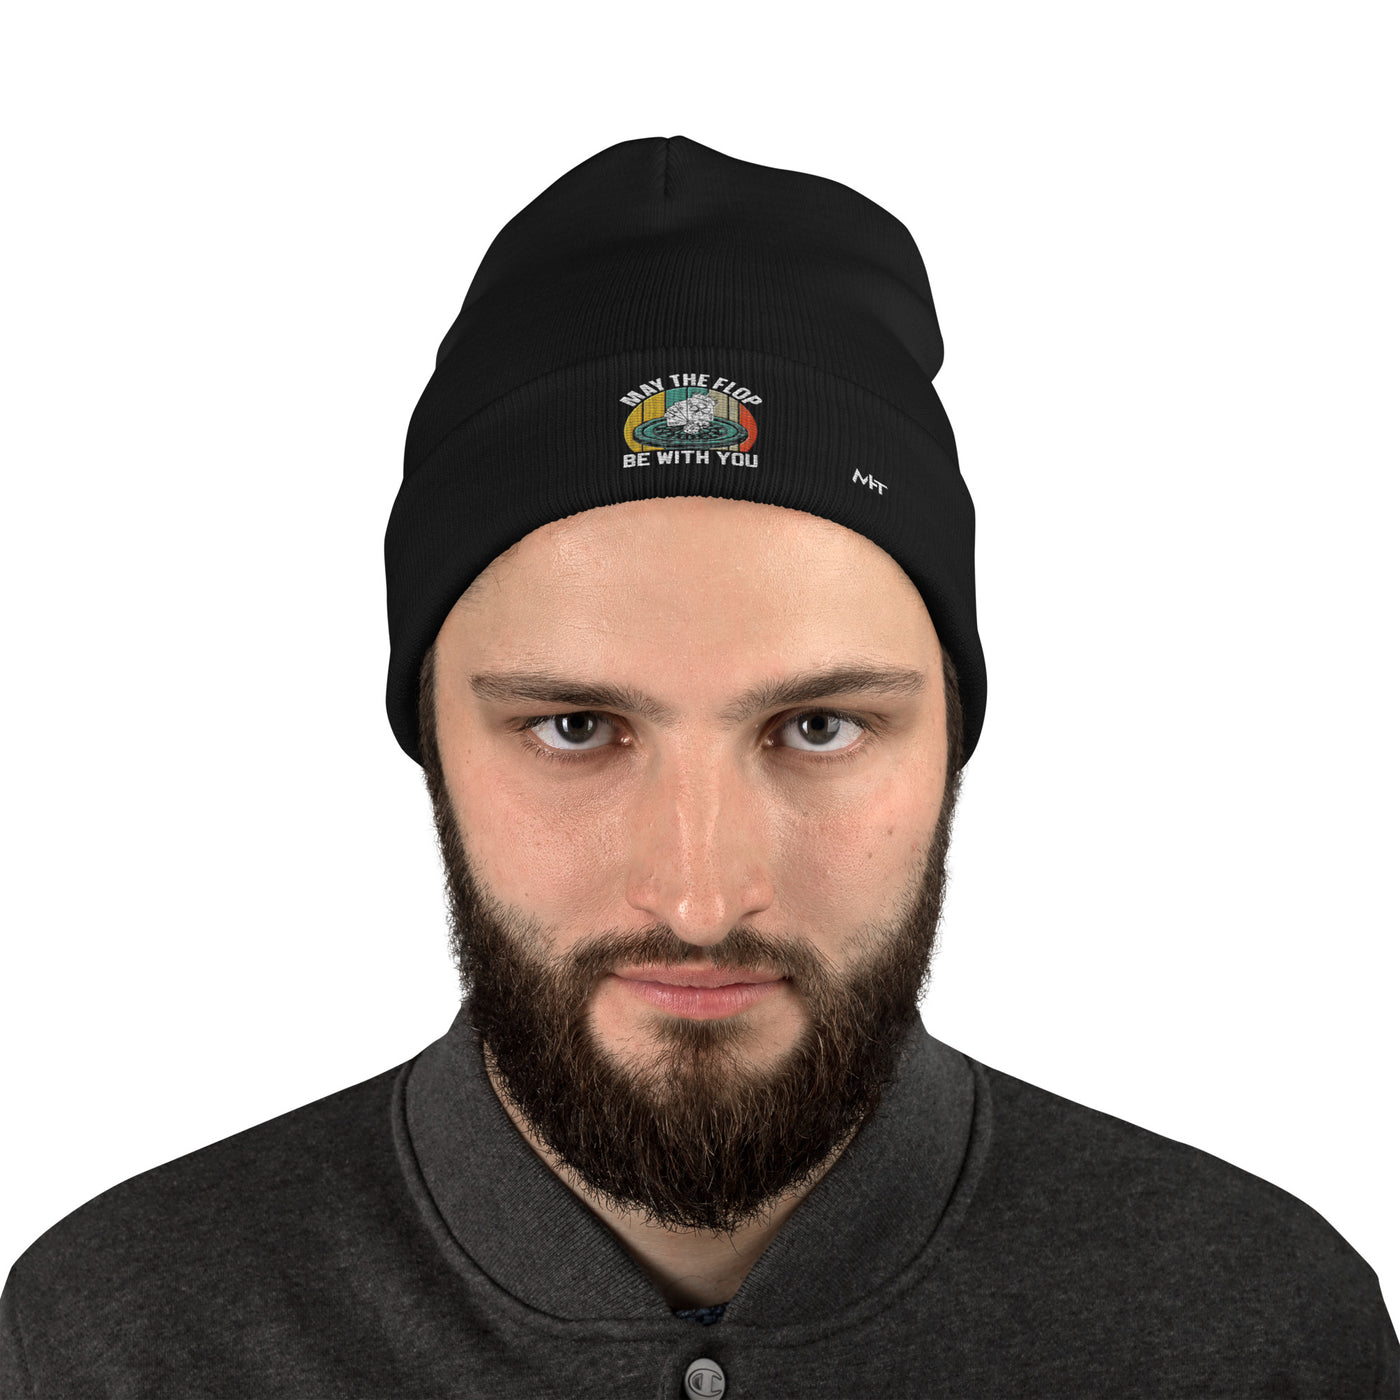 May the Flop be with you - Embroidered Beanie